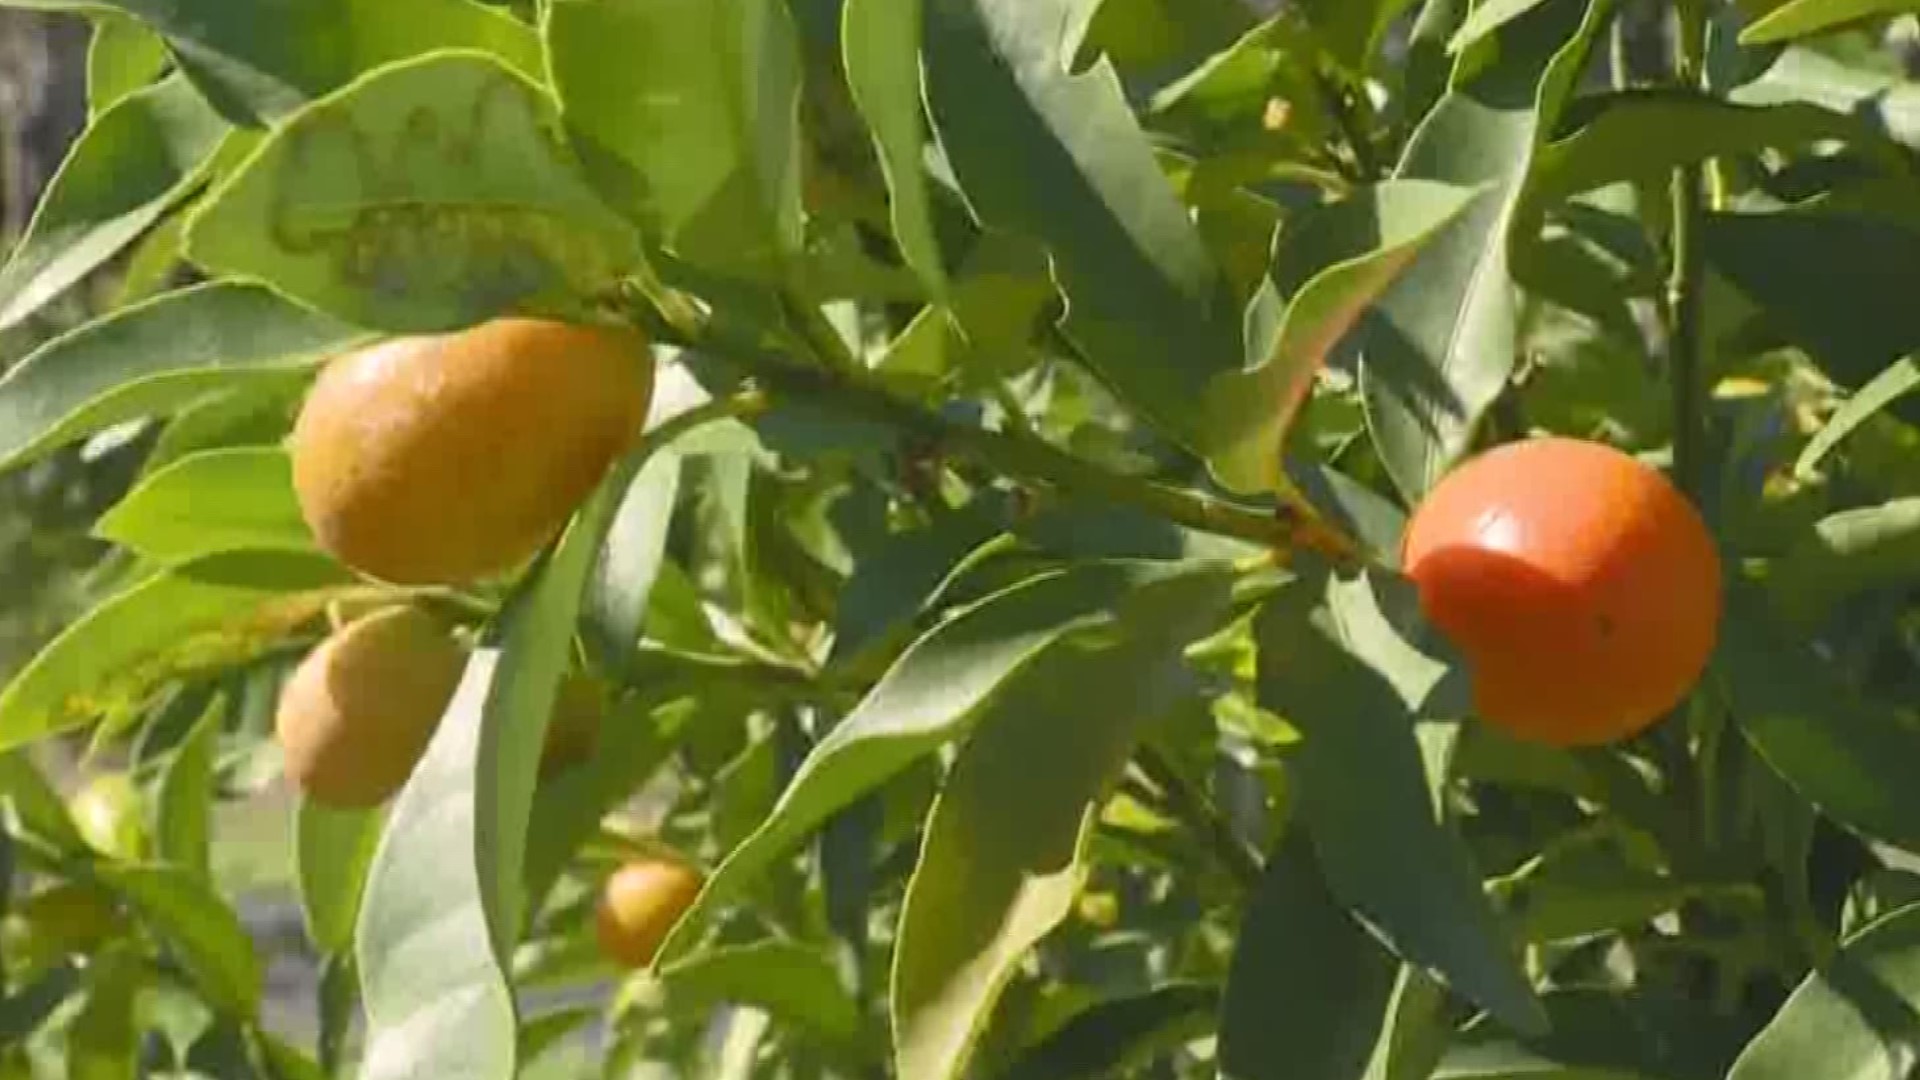 It could be tough timing for kumquat fans, weather-wise.